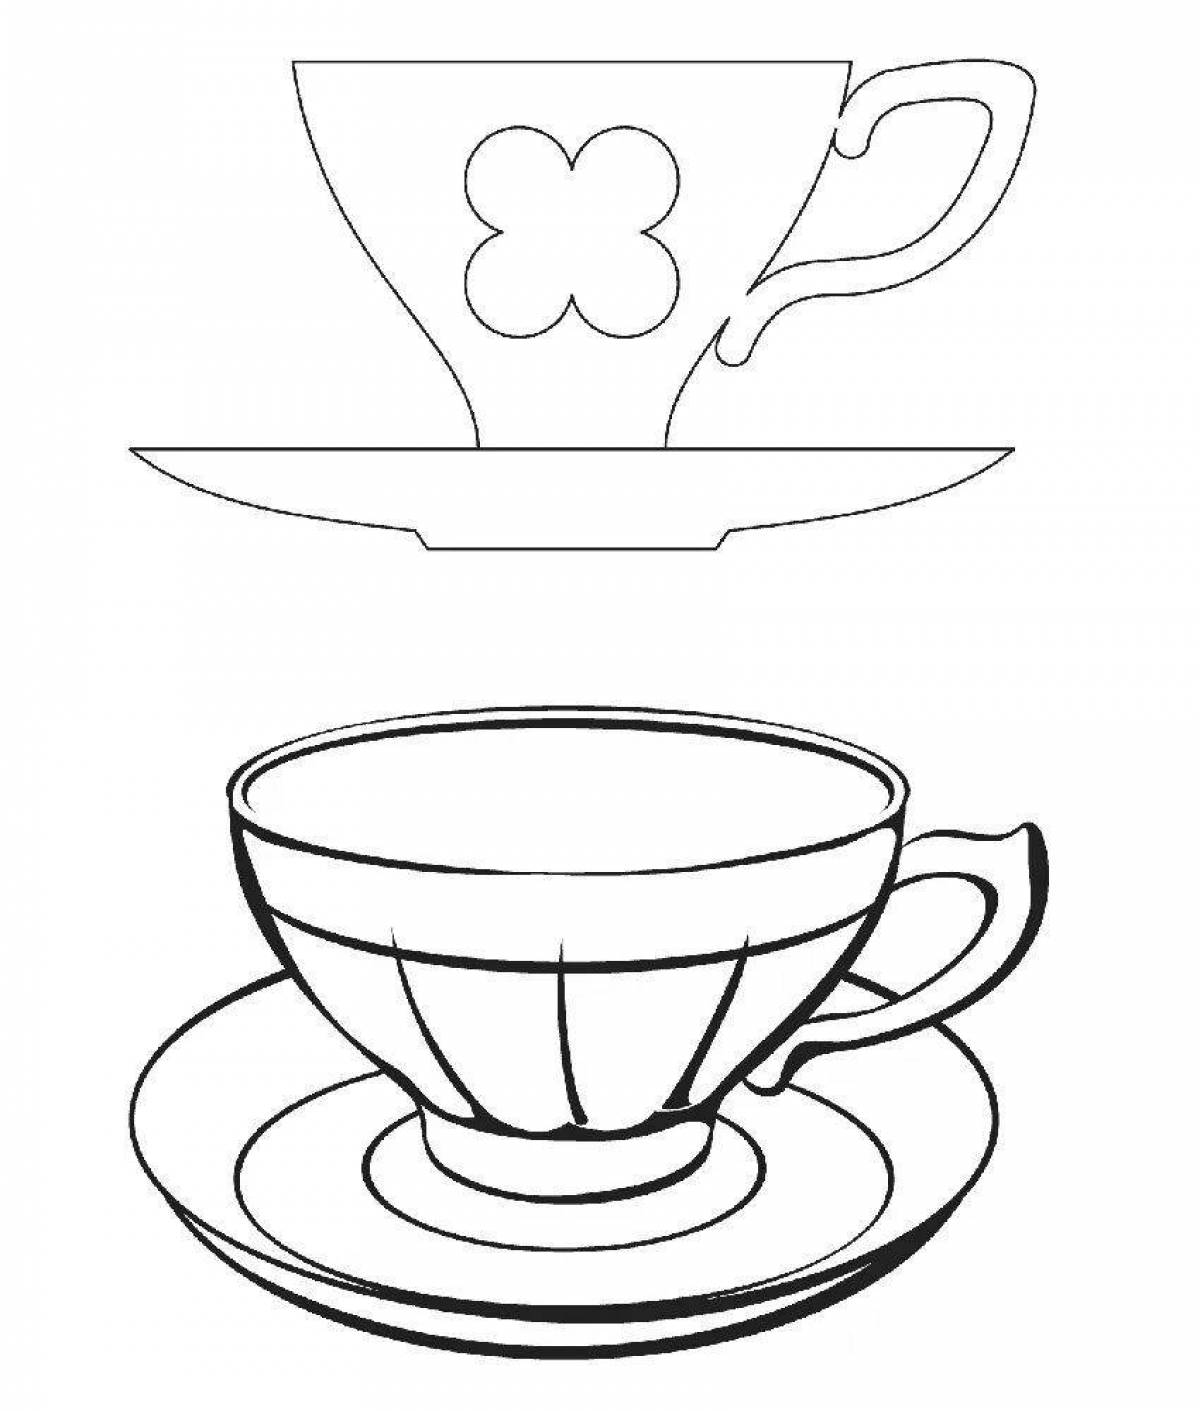 Playful cup and saucer coloring page